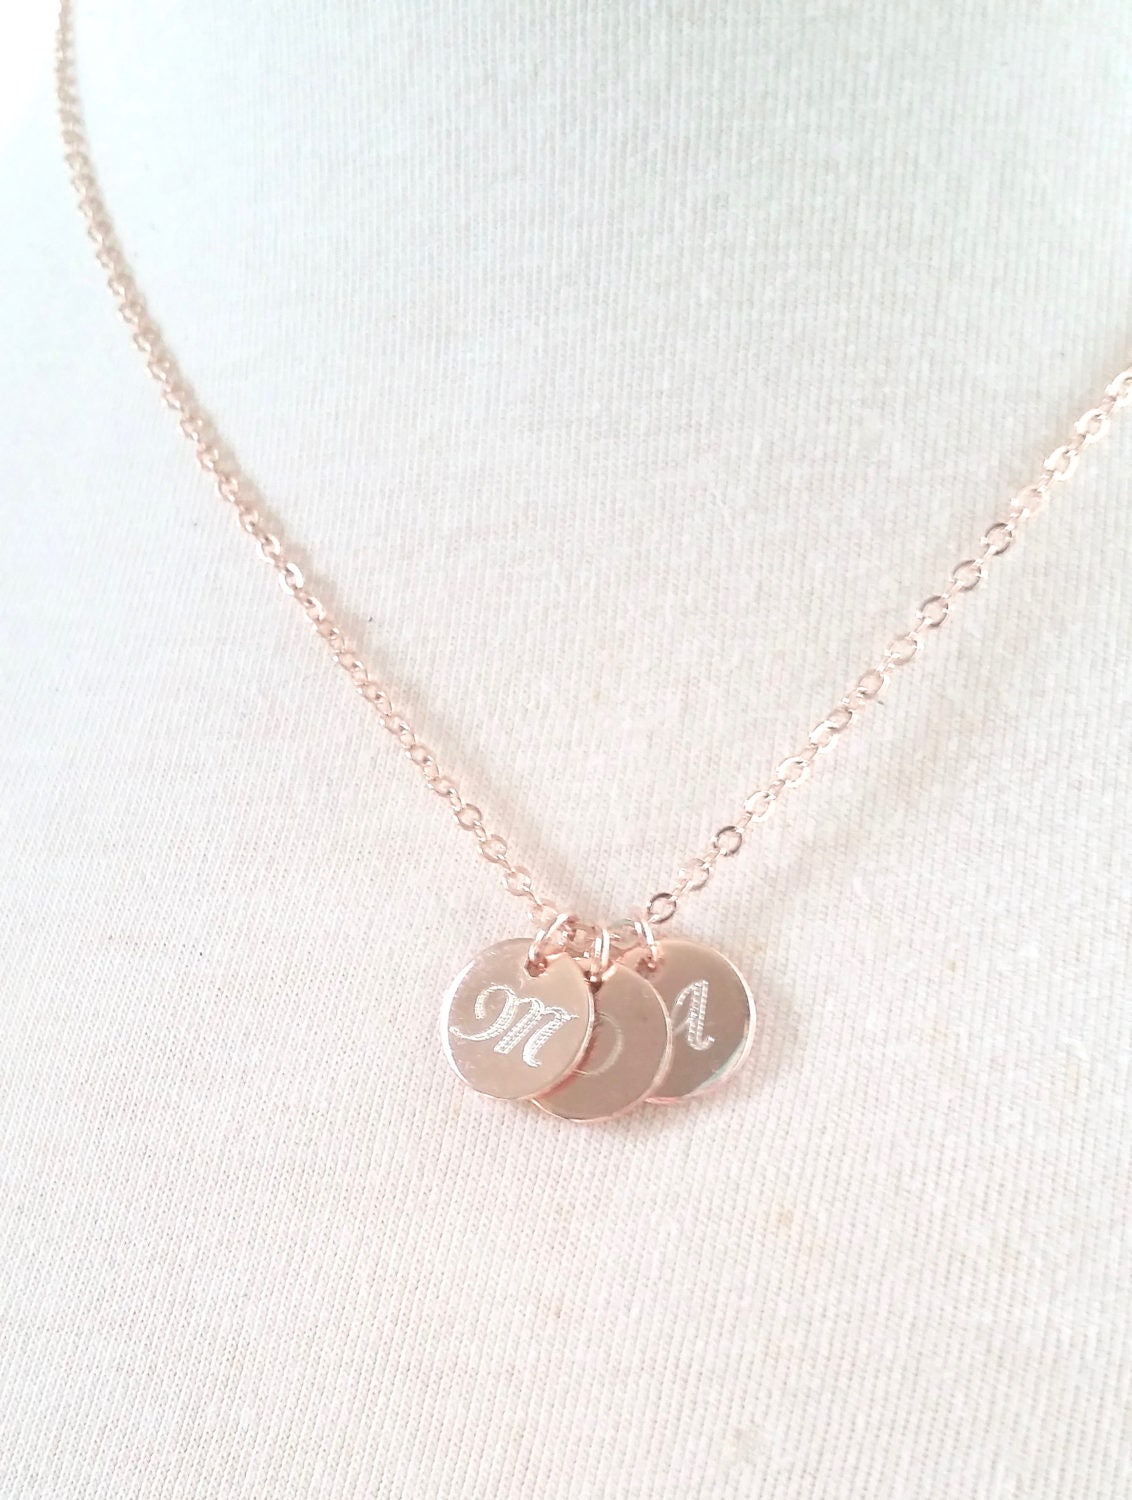 Initial necklace in rose gold - Monogram Disc necklace